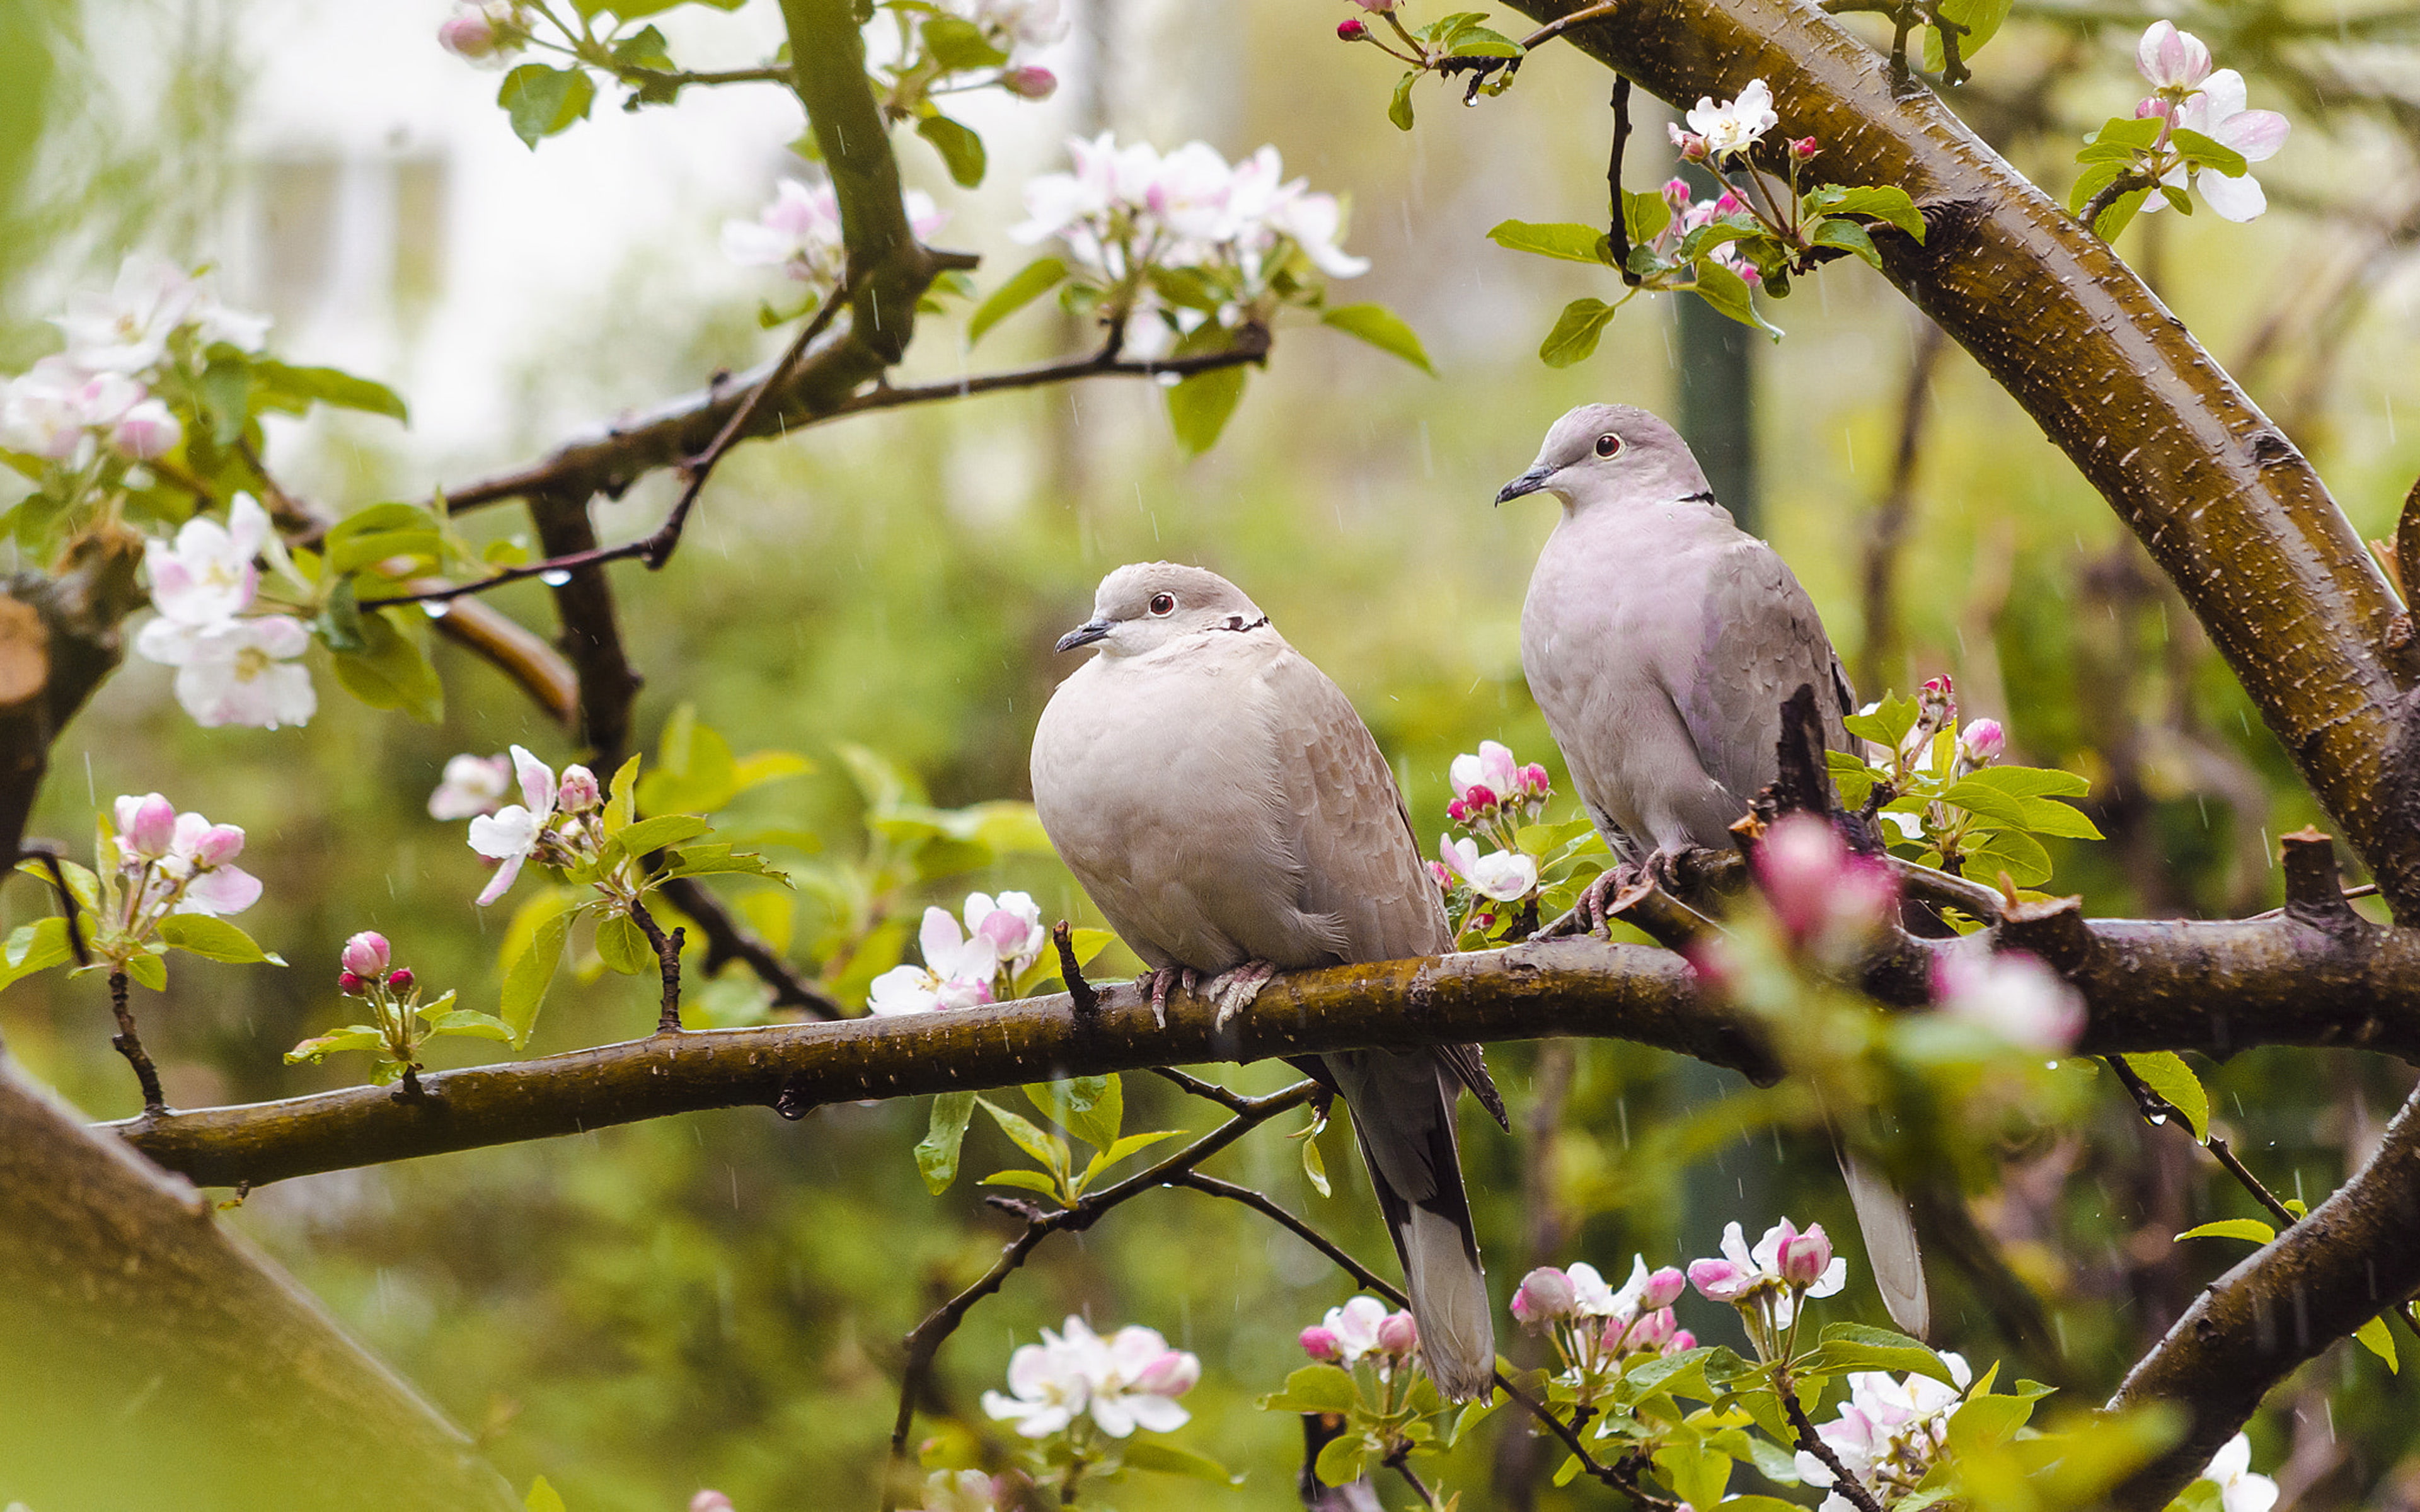 bird eurasian collared dove type of dove born in warm moderate and subtropical asia spring rain flowers on apple wallpaper for desktop 3840%D1%852400 wallpaper 0070f5c9ffd6fe03082f6746abc634a8